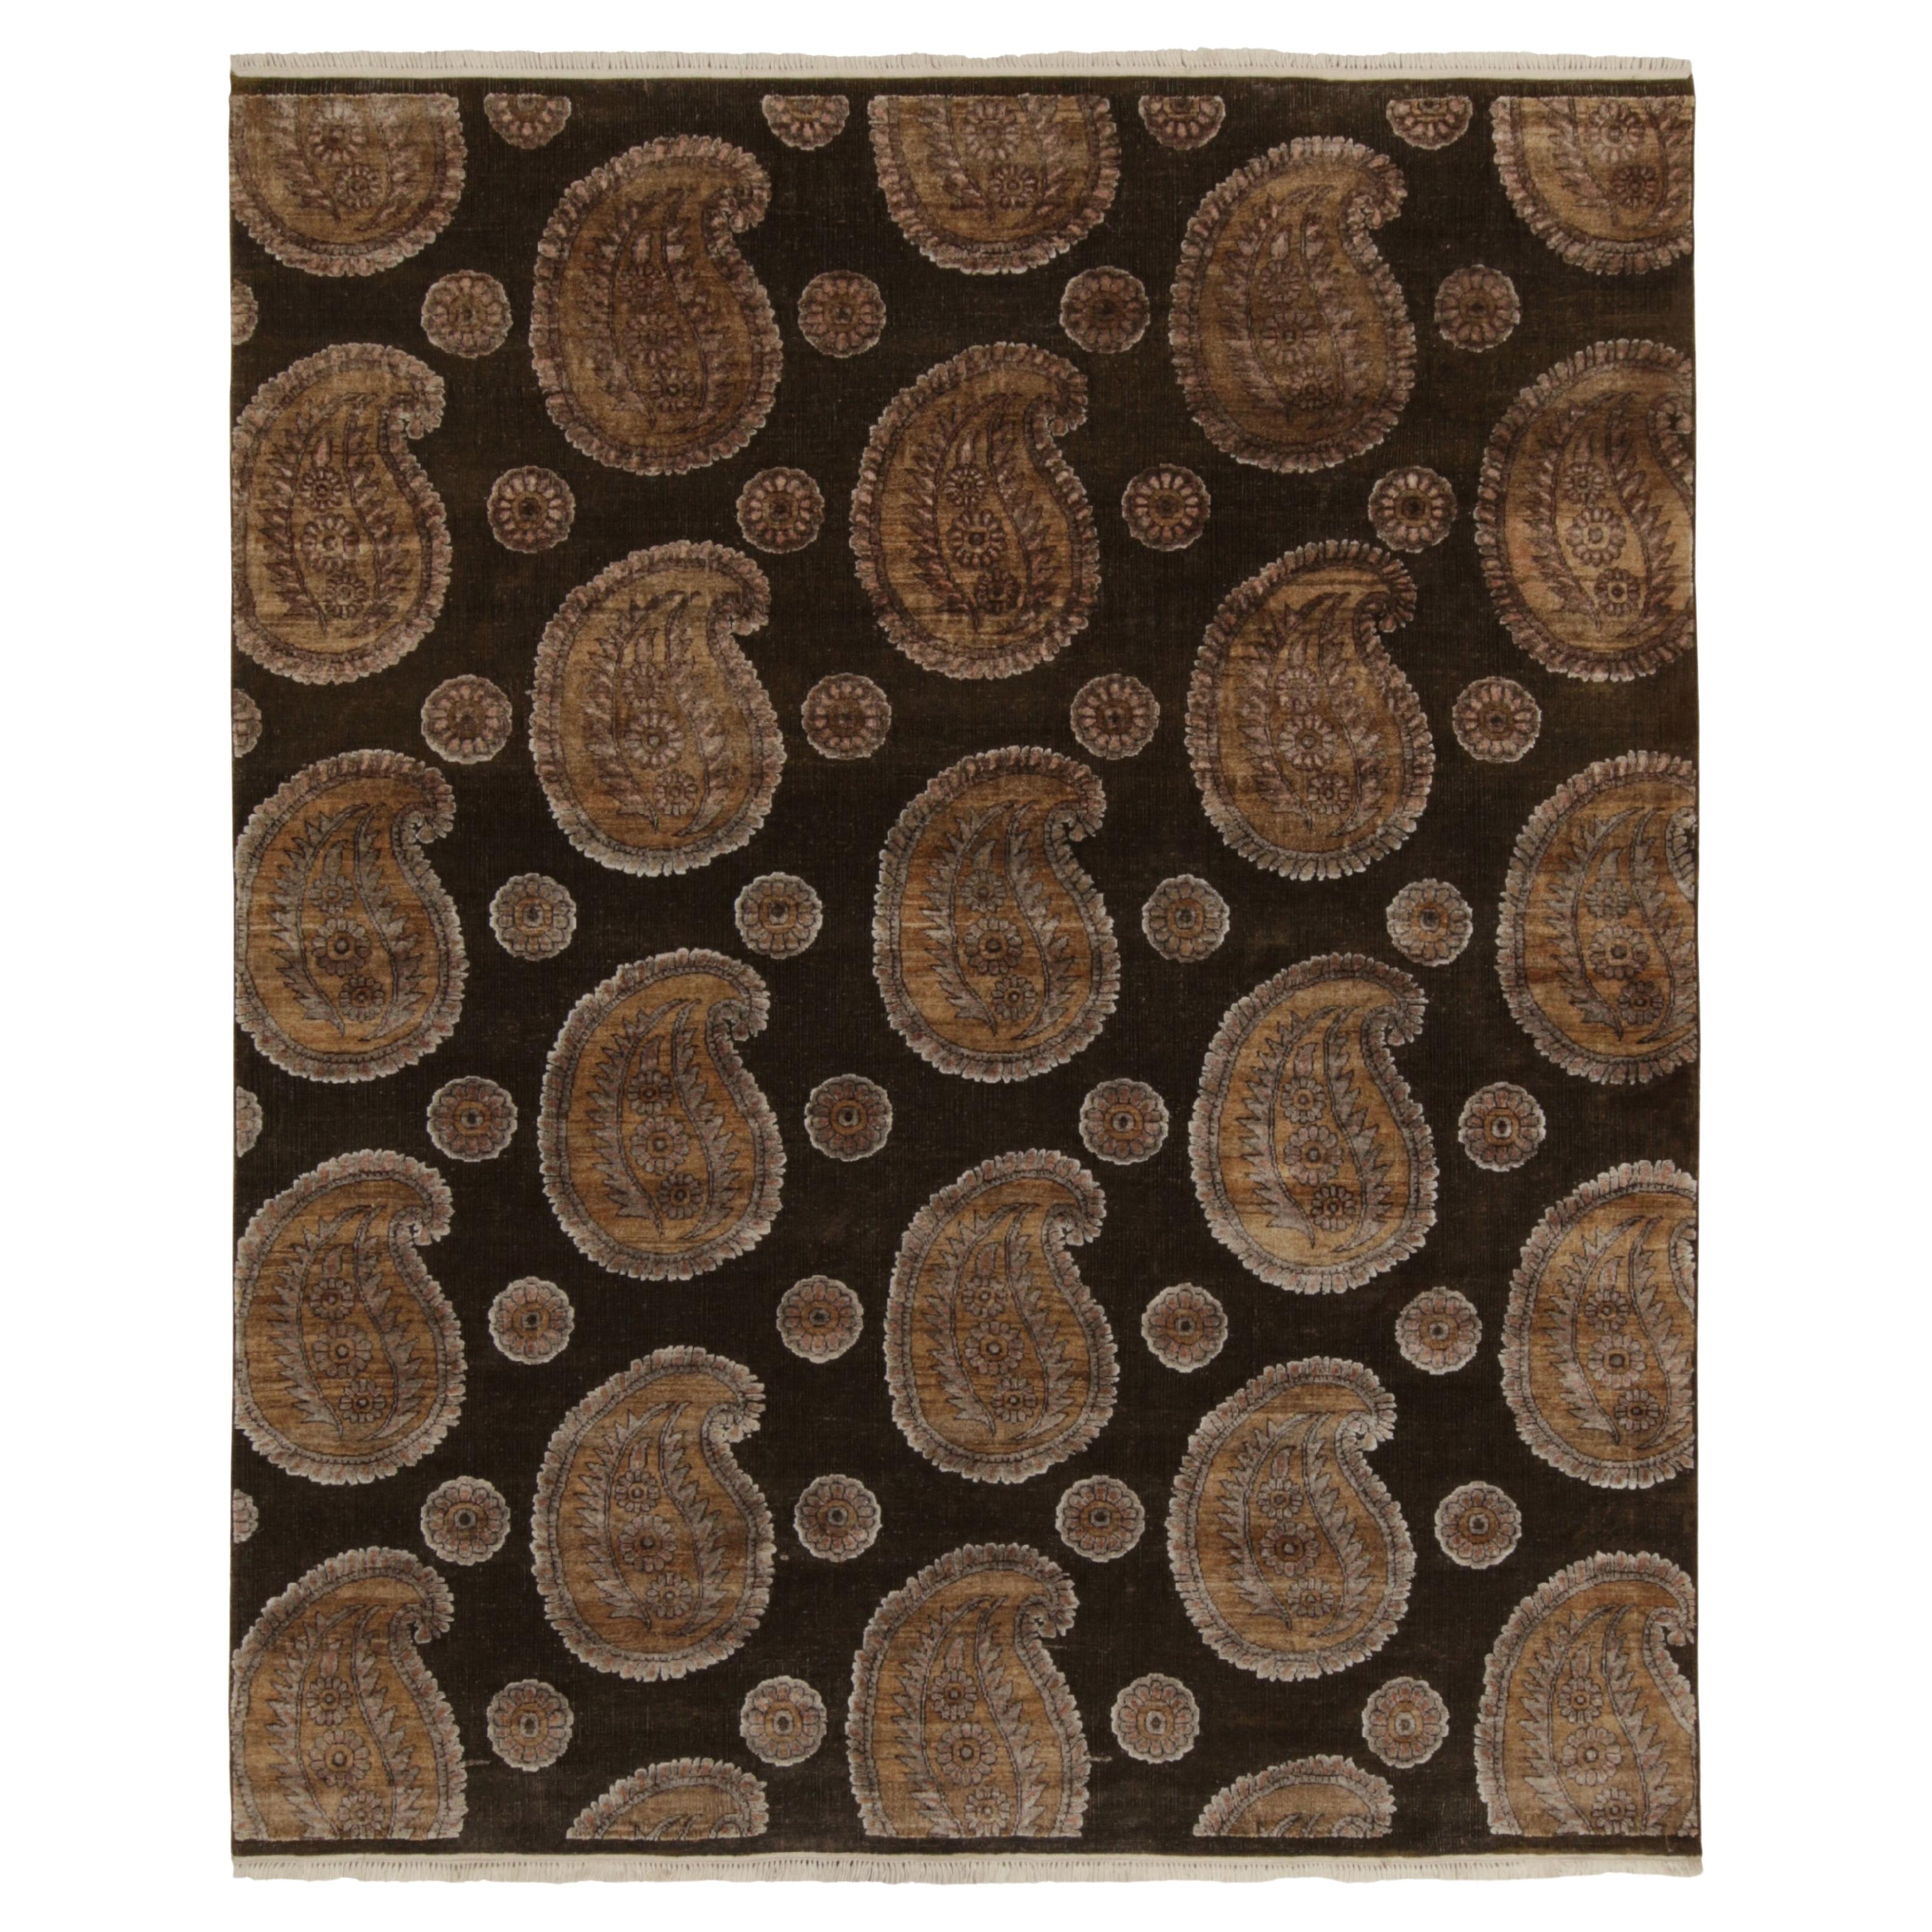 Rug & Kilim’s Classic style rug in Beige, Brown and Gold Paisley Patterns For Sale